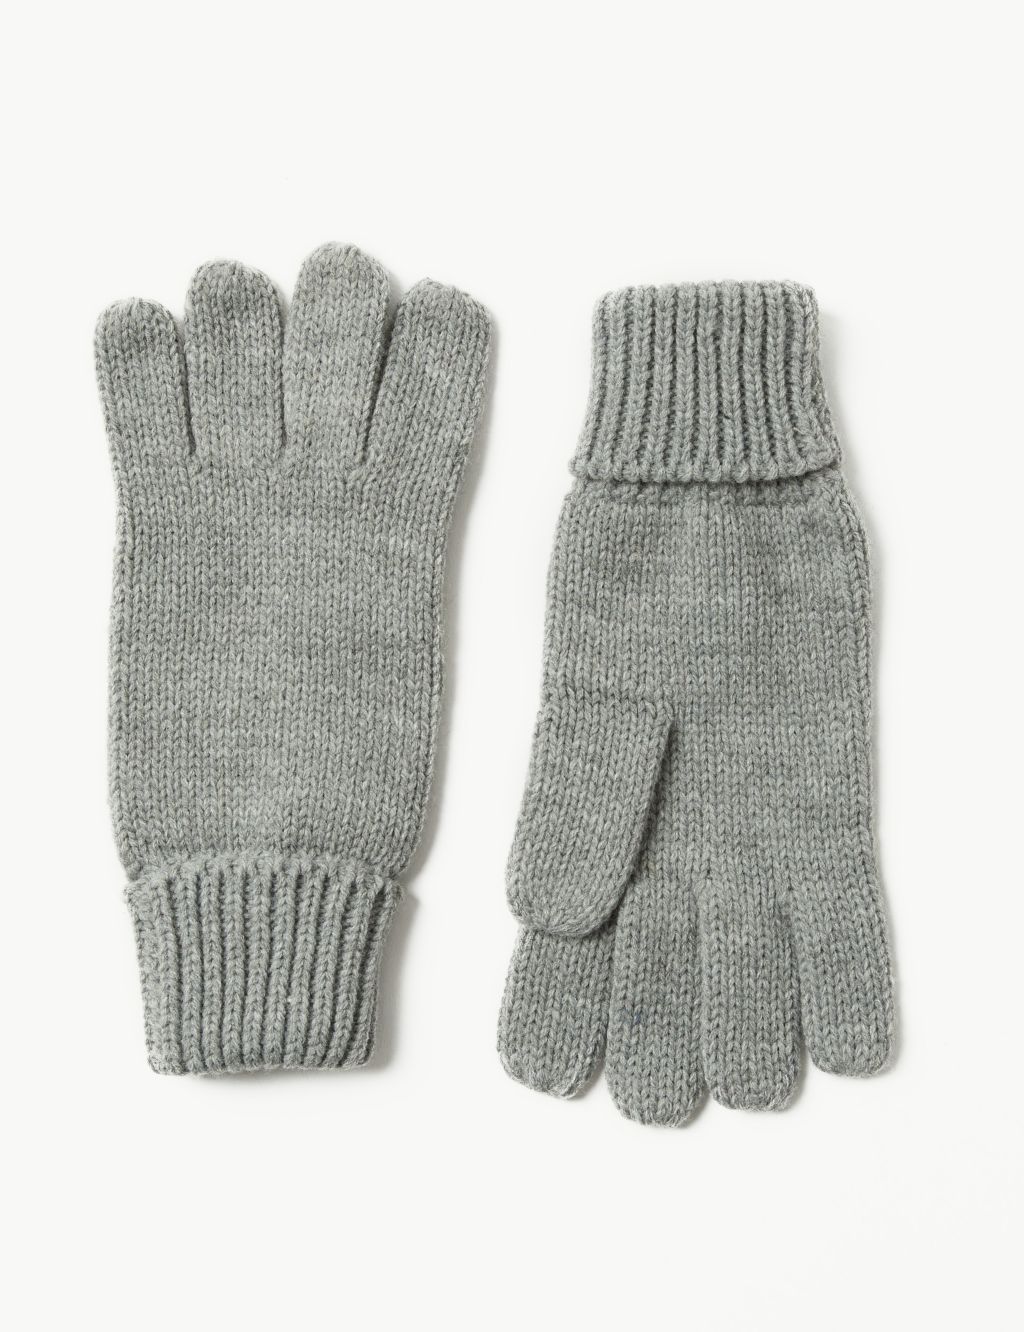 Knitted Gloves 1 of 1